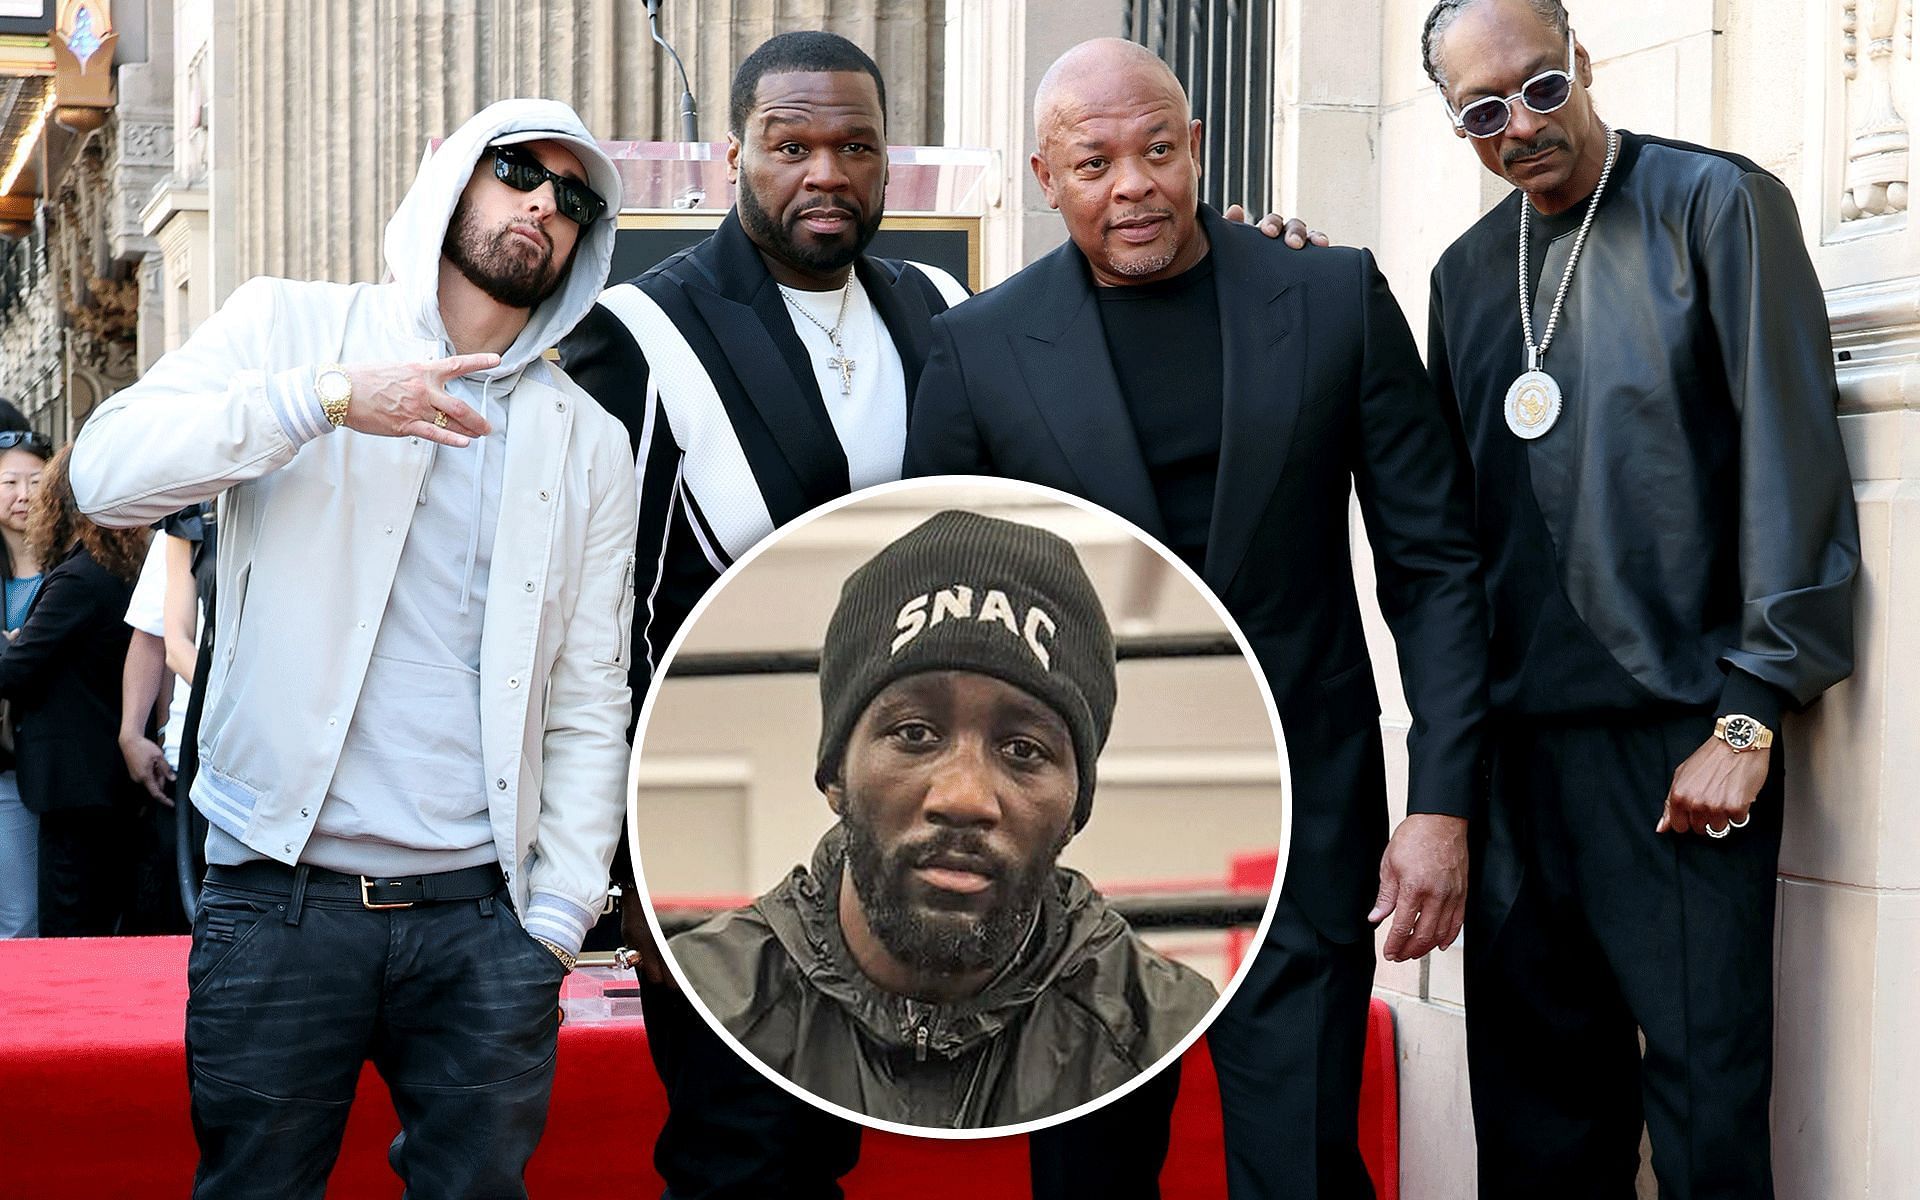 Terence Crawford (inset) accompanied world-renowned musicians Eminem (left), 50 Cent (second from left), Dr. Dre (second from right), and Snoop Dogg (right) to the Hollywood Walk of Fame ceremony [Images courtesy: @tbudcrawford and Getty Images]